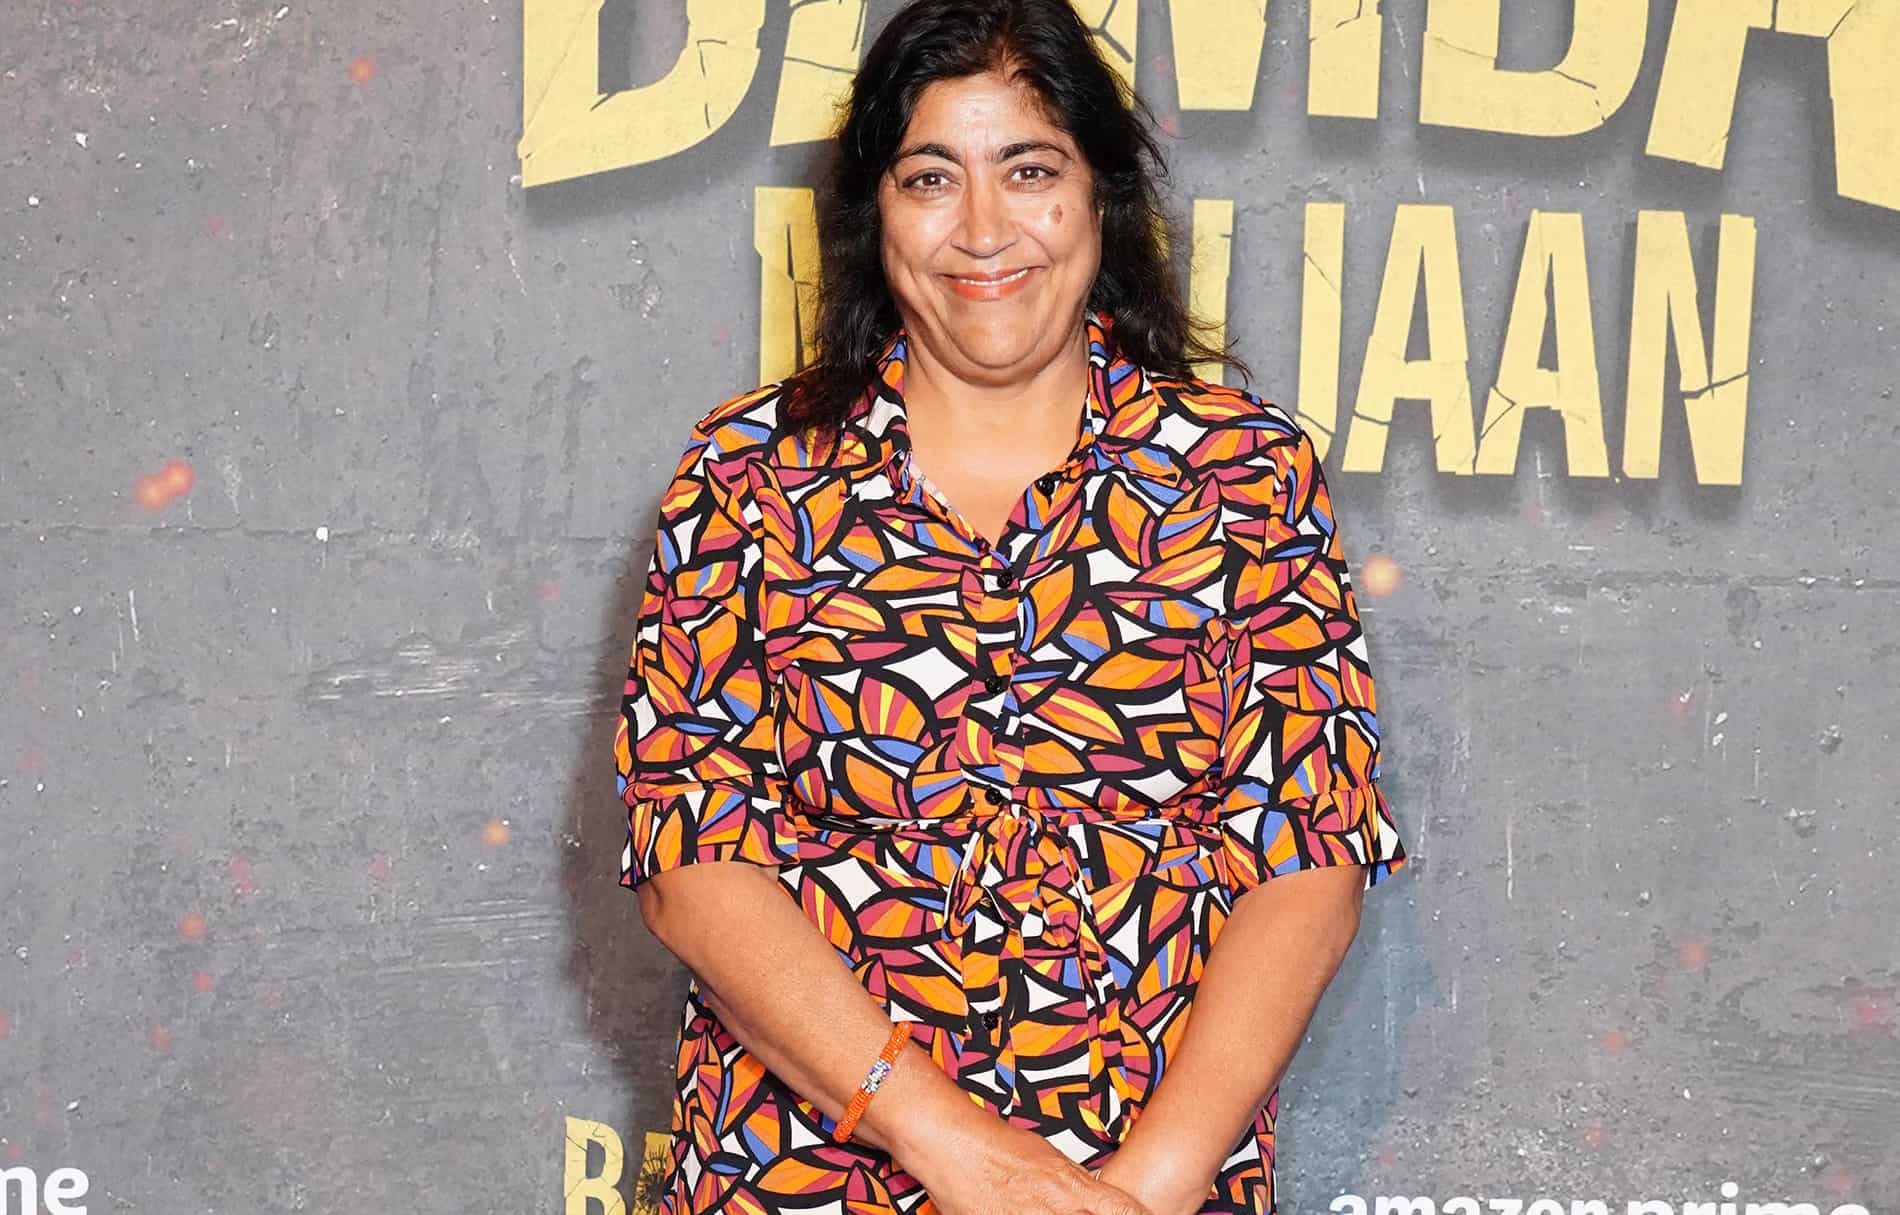 Gurinder Chadha making festive film with Indian Tory Scrooge ‘who hates refugees’